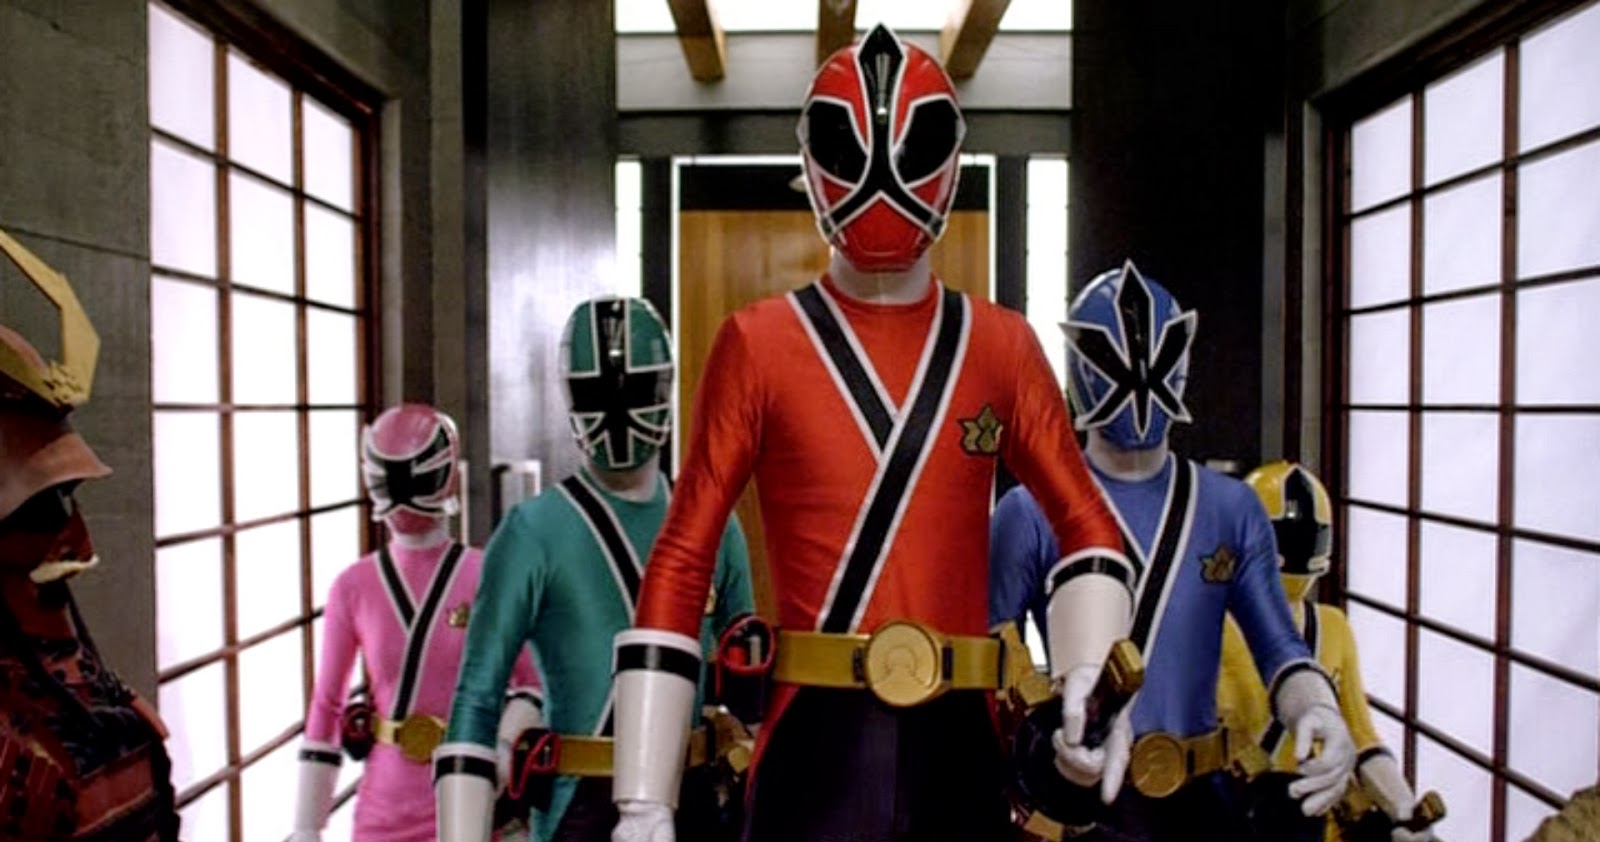 Power Rangers Super Samurai: A Christmas Wish DVD Review and #Giveaway.